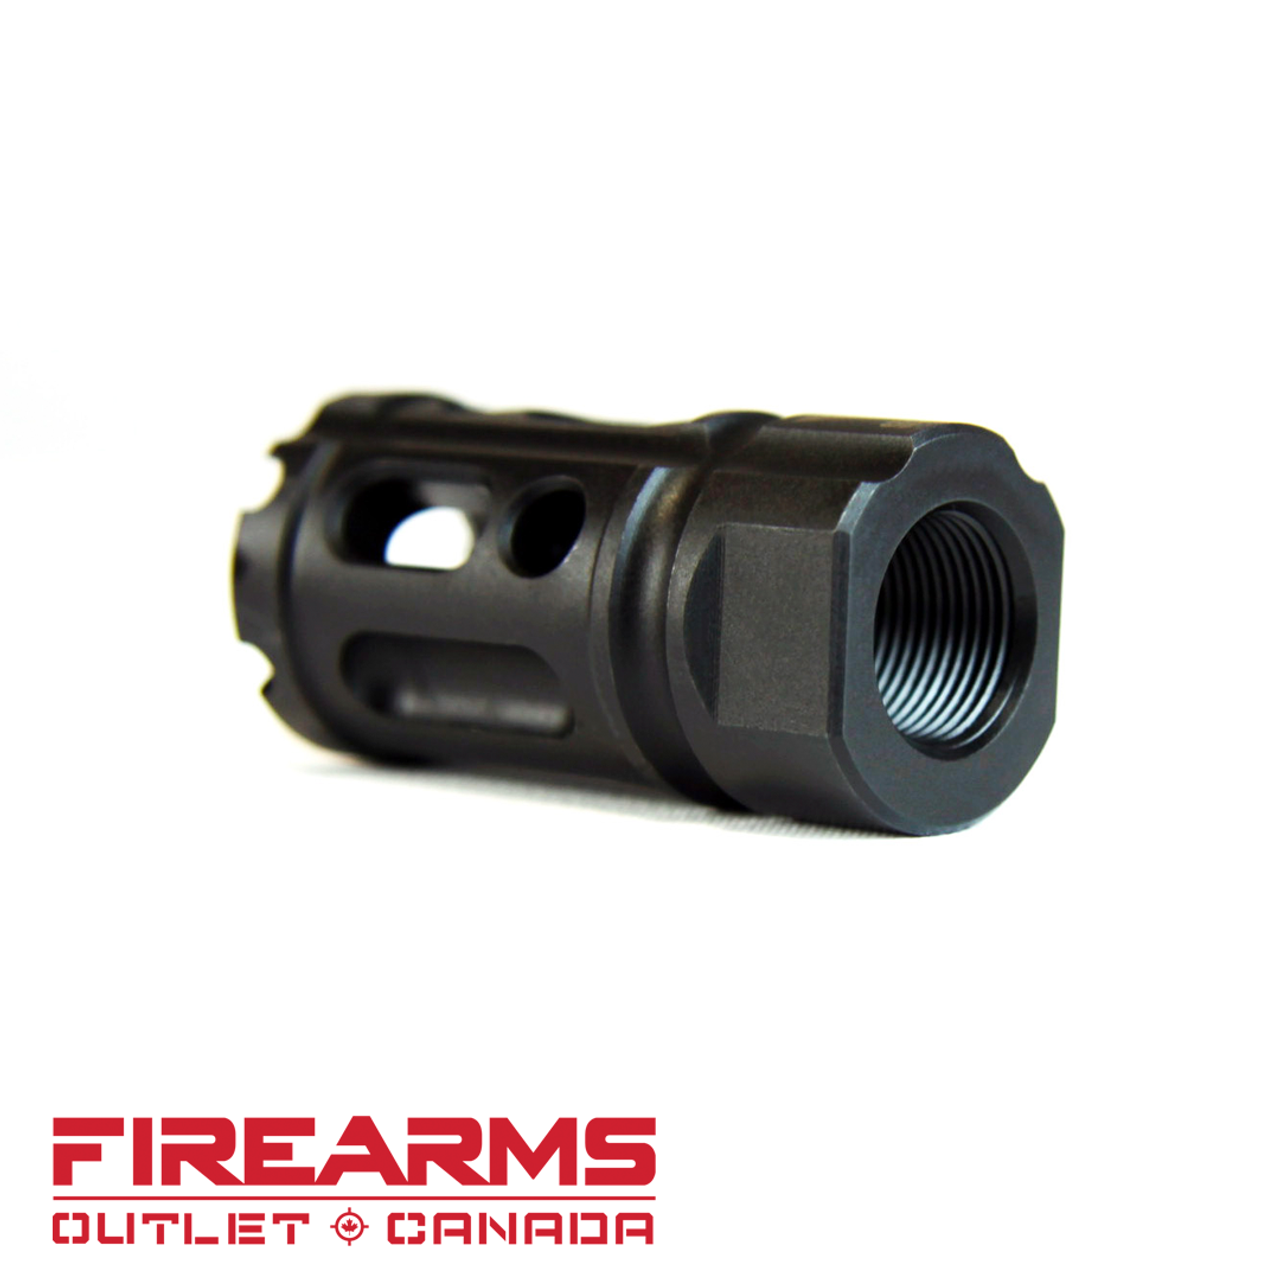 VLTOR Weapon Systems VC-9 Compensator - 9mm, 1/2x28 [VC-9]